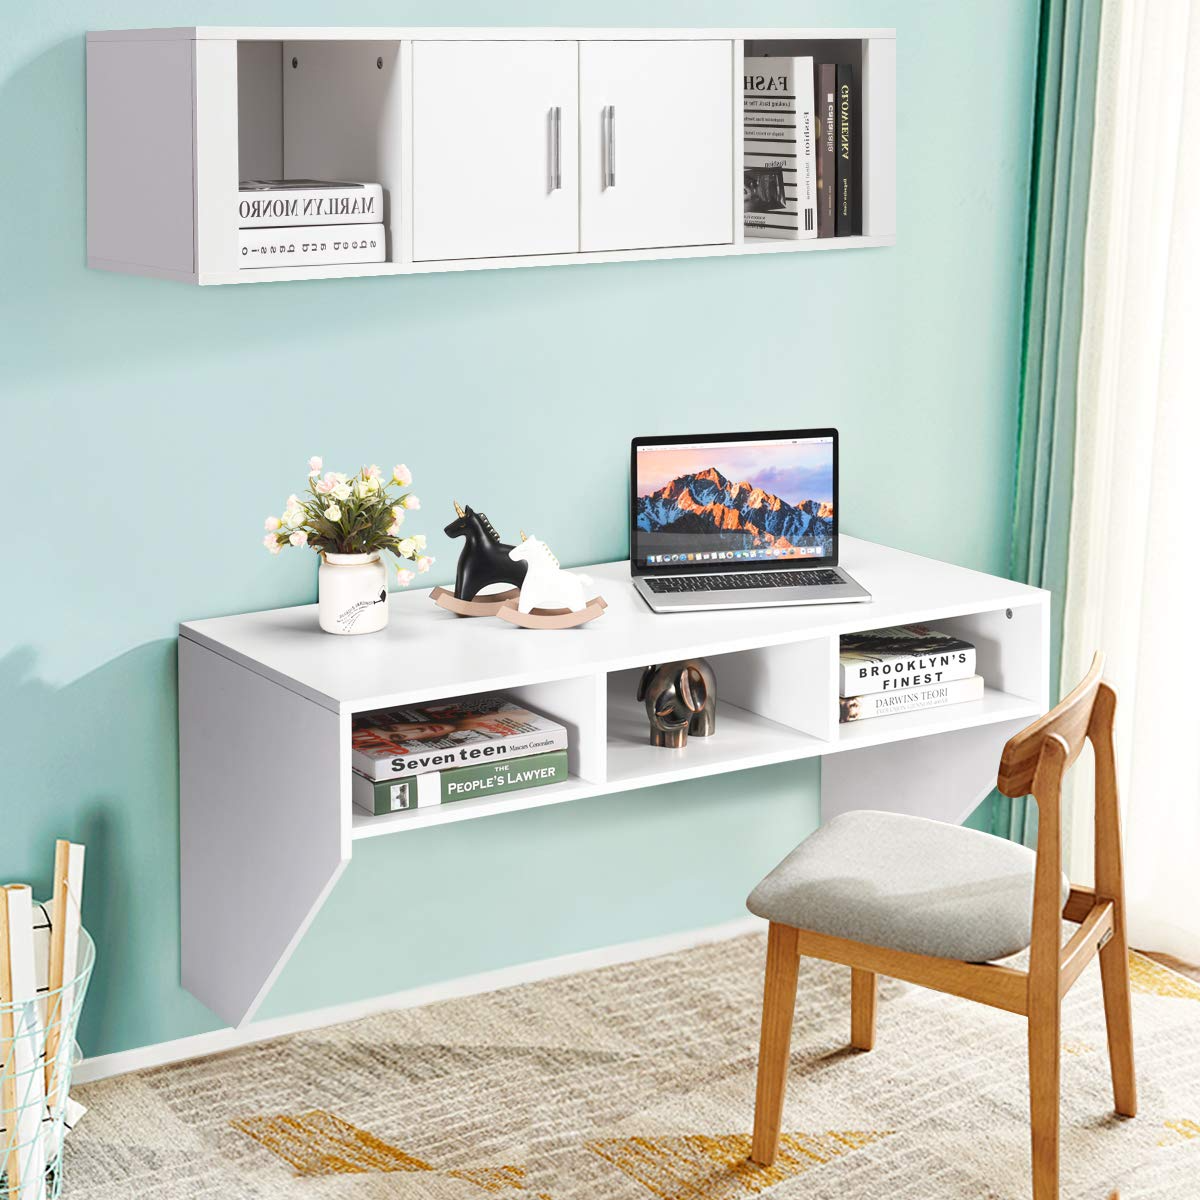 Giantex Wall Mounted Storage Cabinet and Floating Computer Desk Set W/Storage Shelves for Living Room